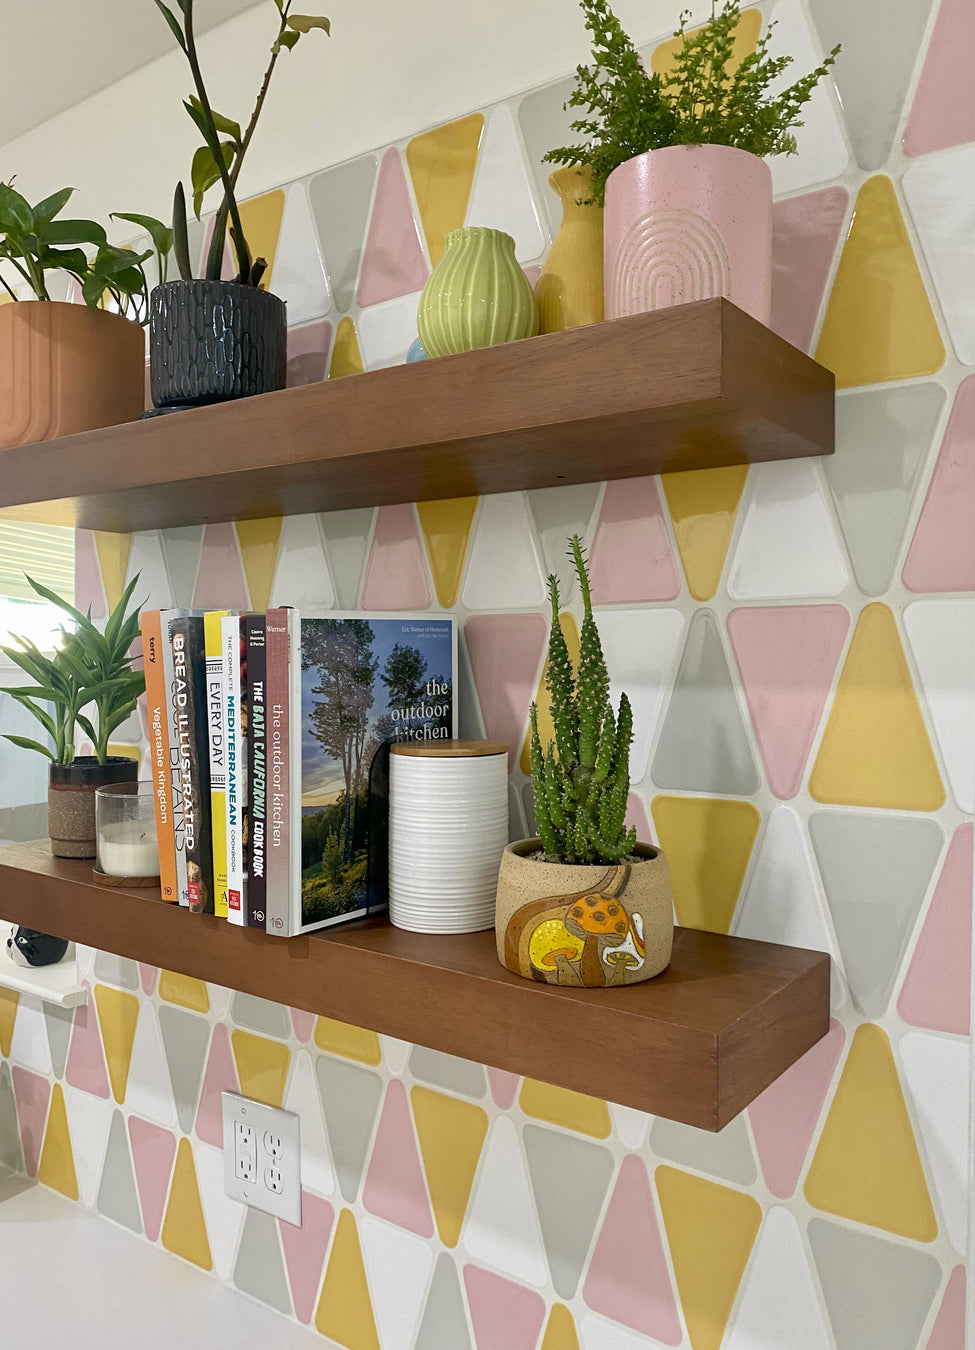 Modwalls Kiln Handmade Wedge Ceramic Tile | Colorful midcentury and modern tile for backsplashes, kitchens, bathrooms, showers & feature areas. 